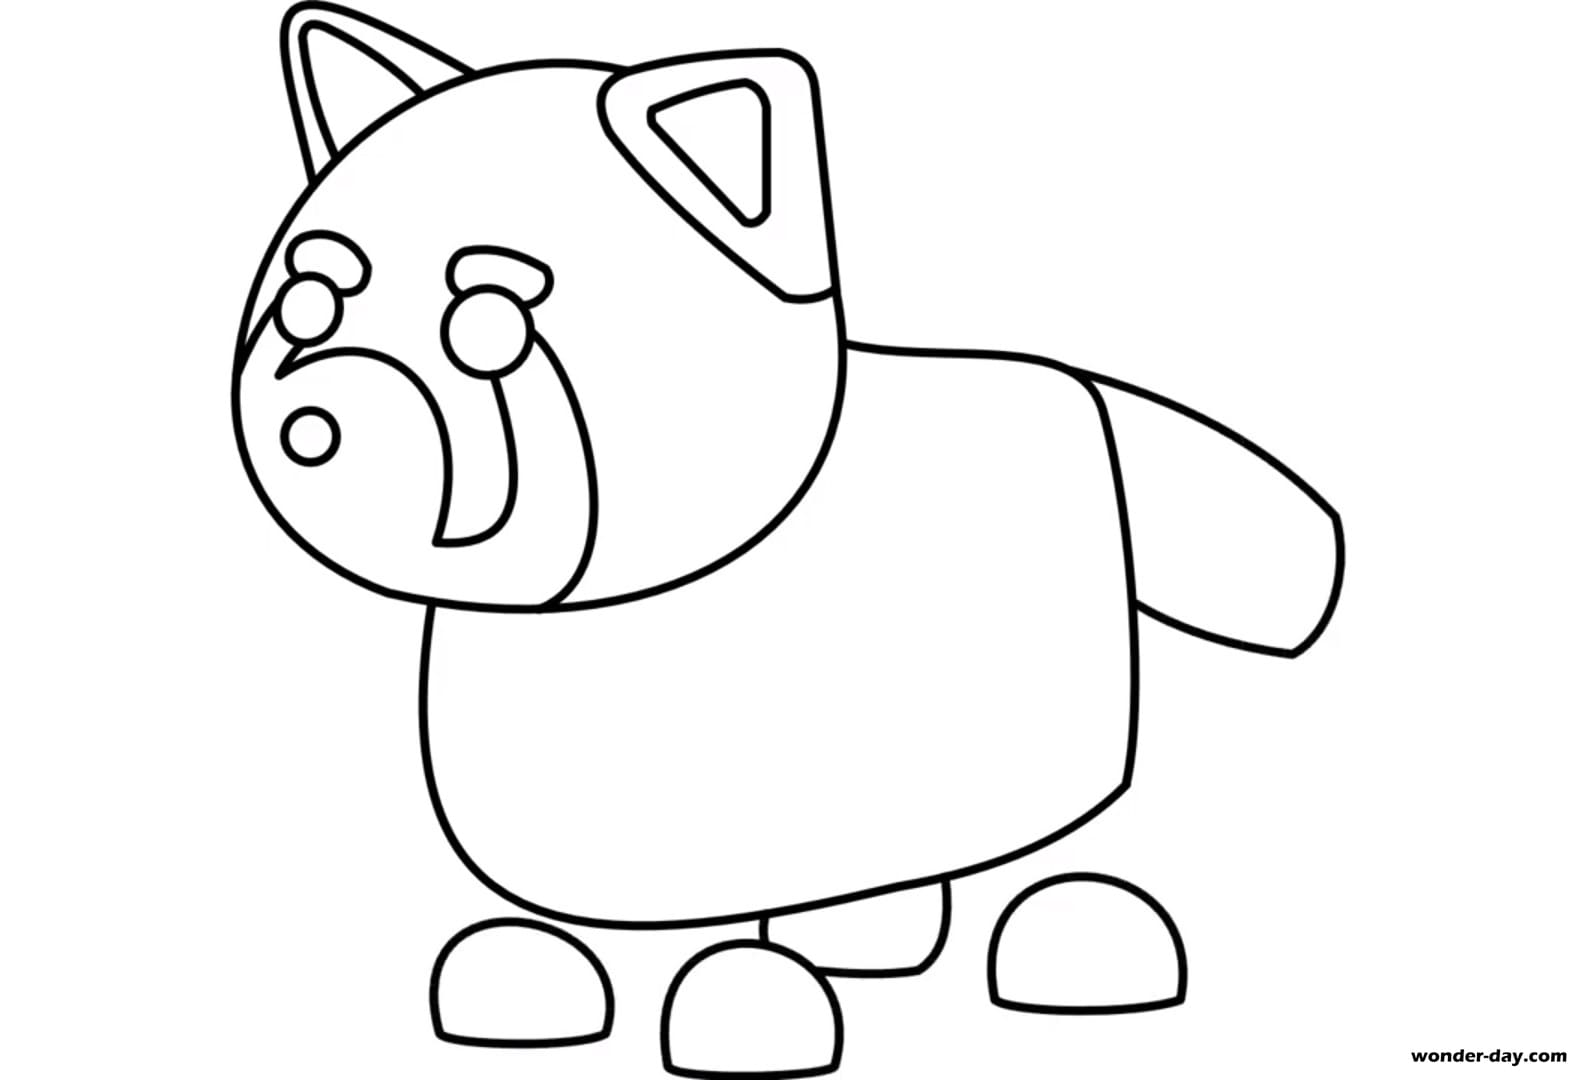 Coloring Pages Adopt Me Print For Free Wonder Day Com - panda roblox adopt me pets pictures